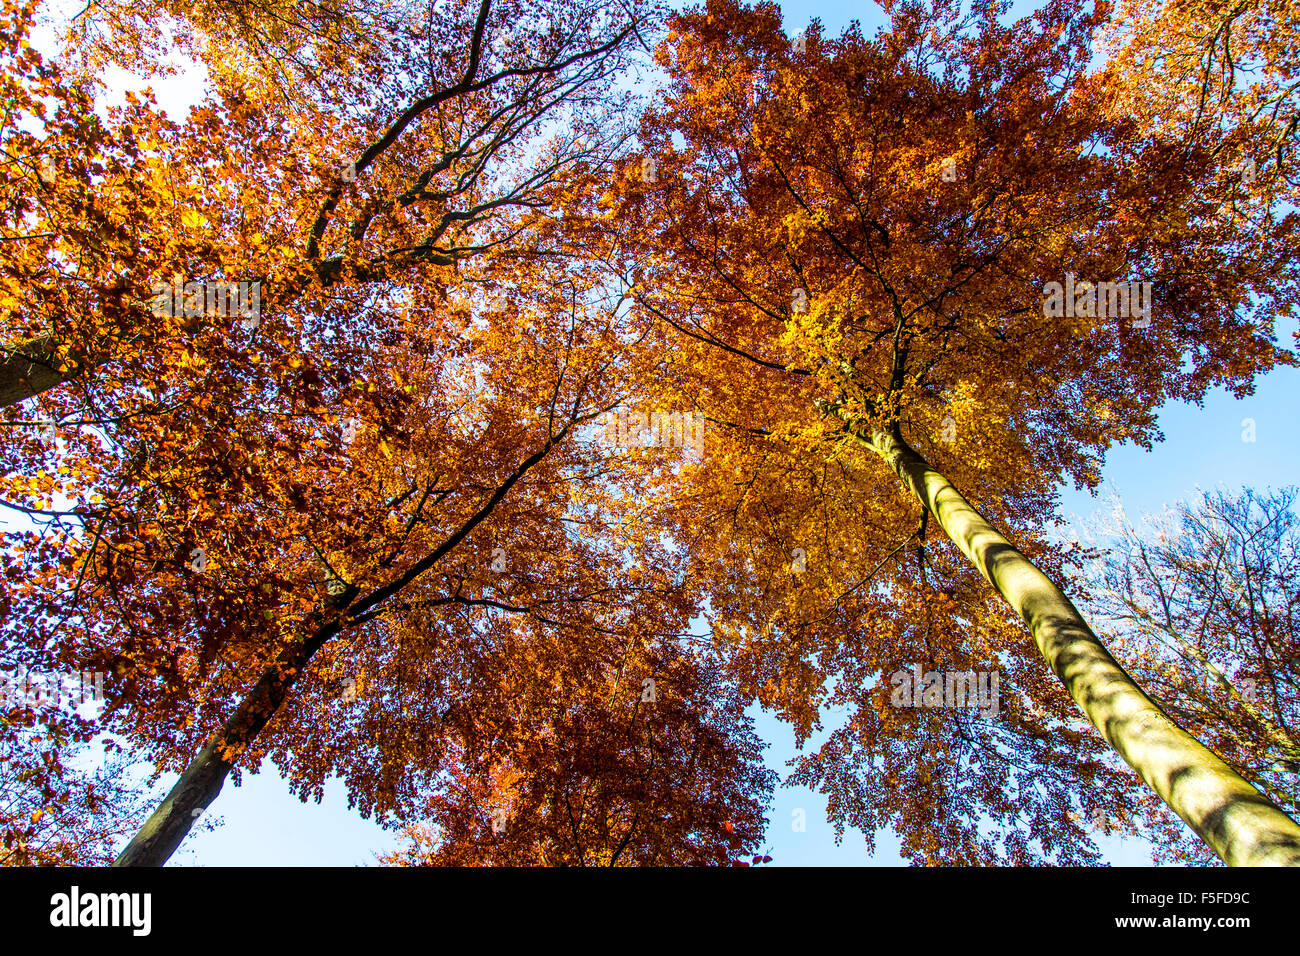 Forest in fall colors, autumn trees, foliage, near Boppard, Rhine valley, Germany Stock Photo